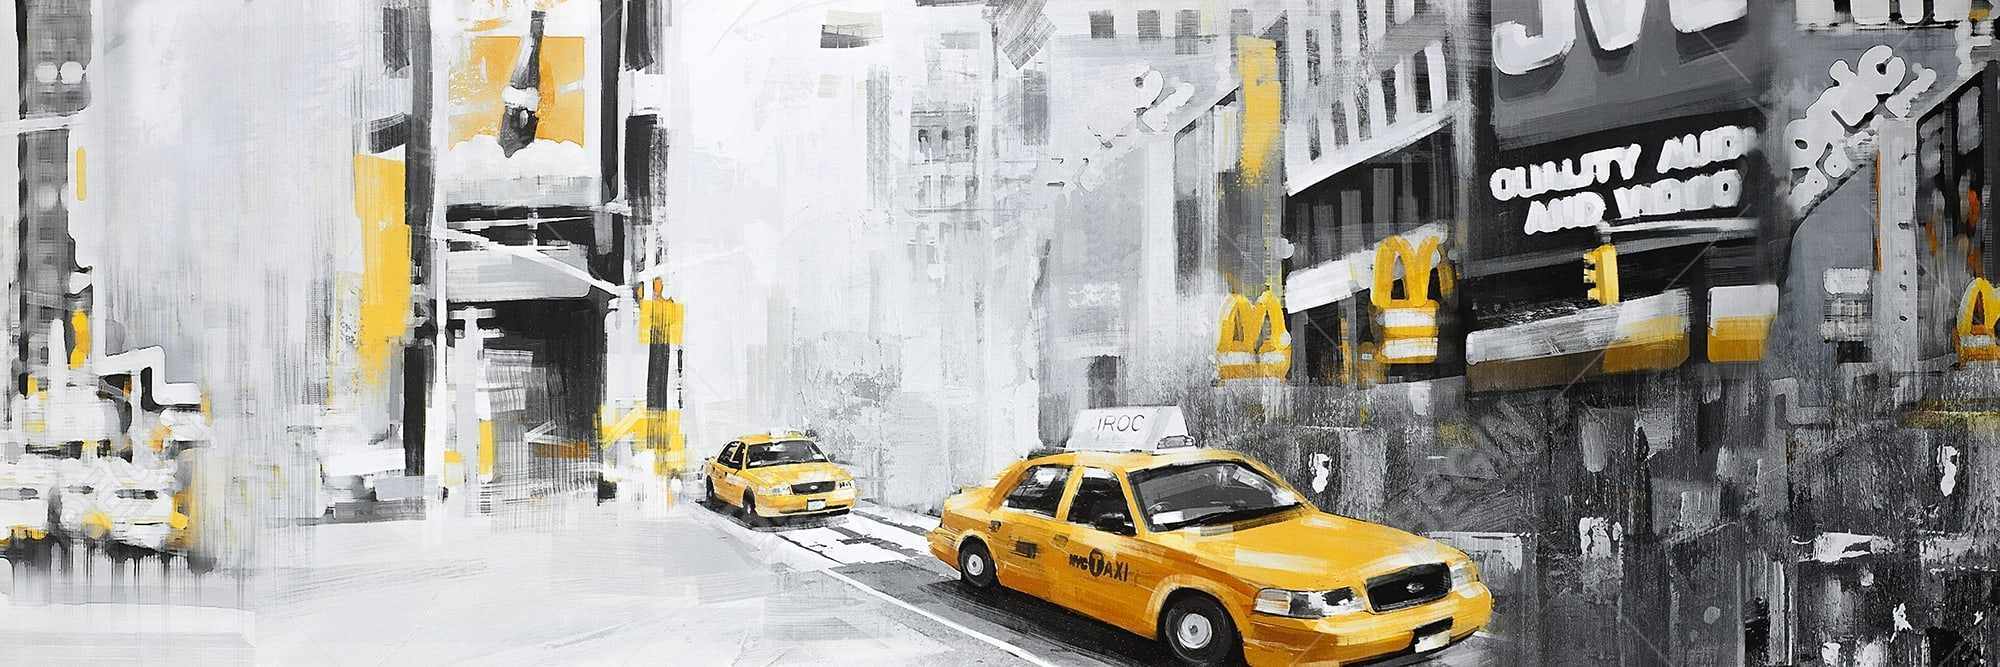 New york city with taxis